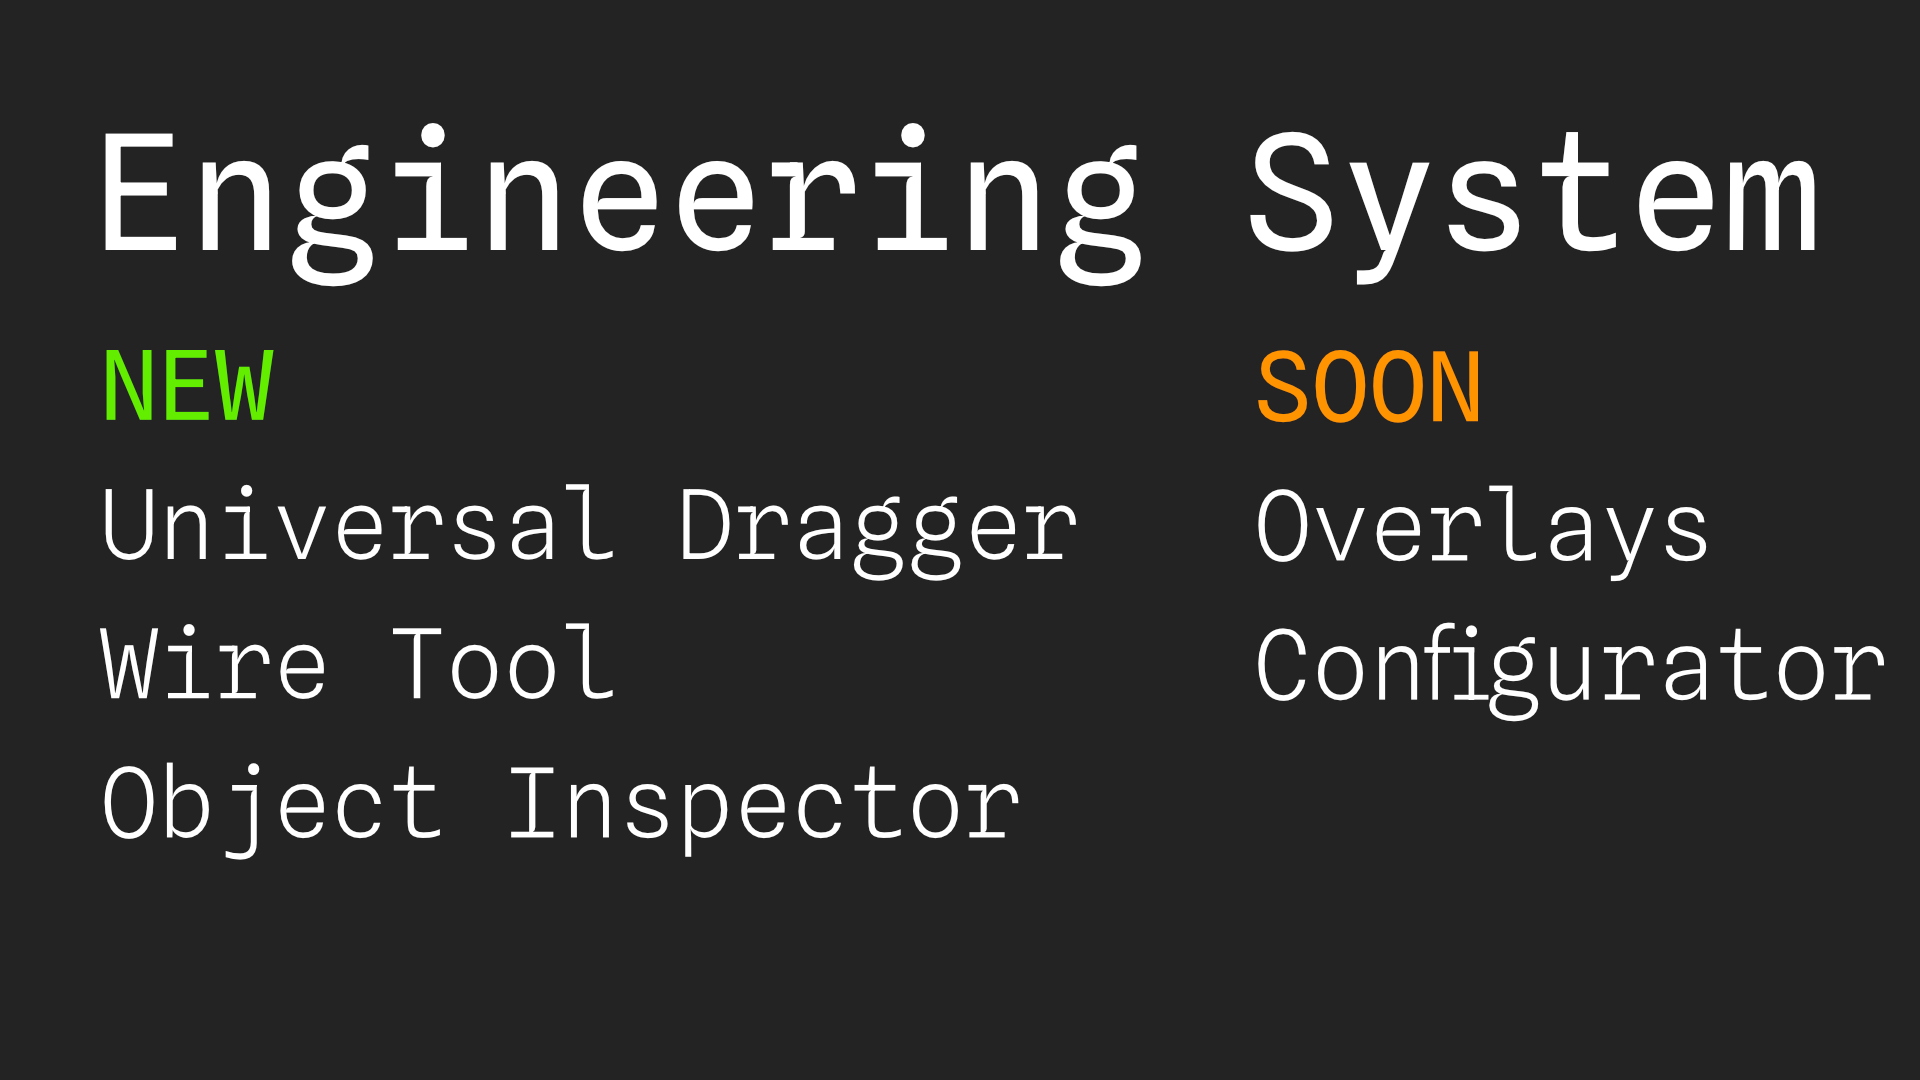 Engineering System Overview